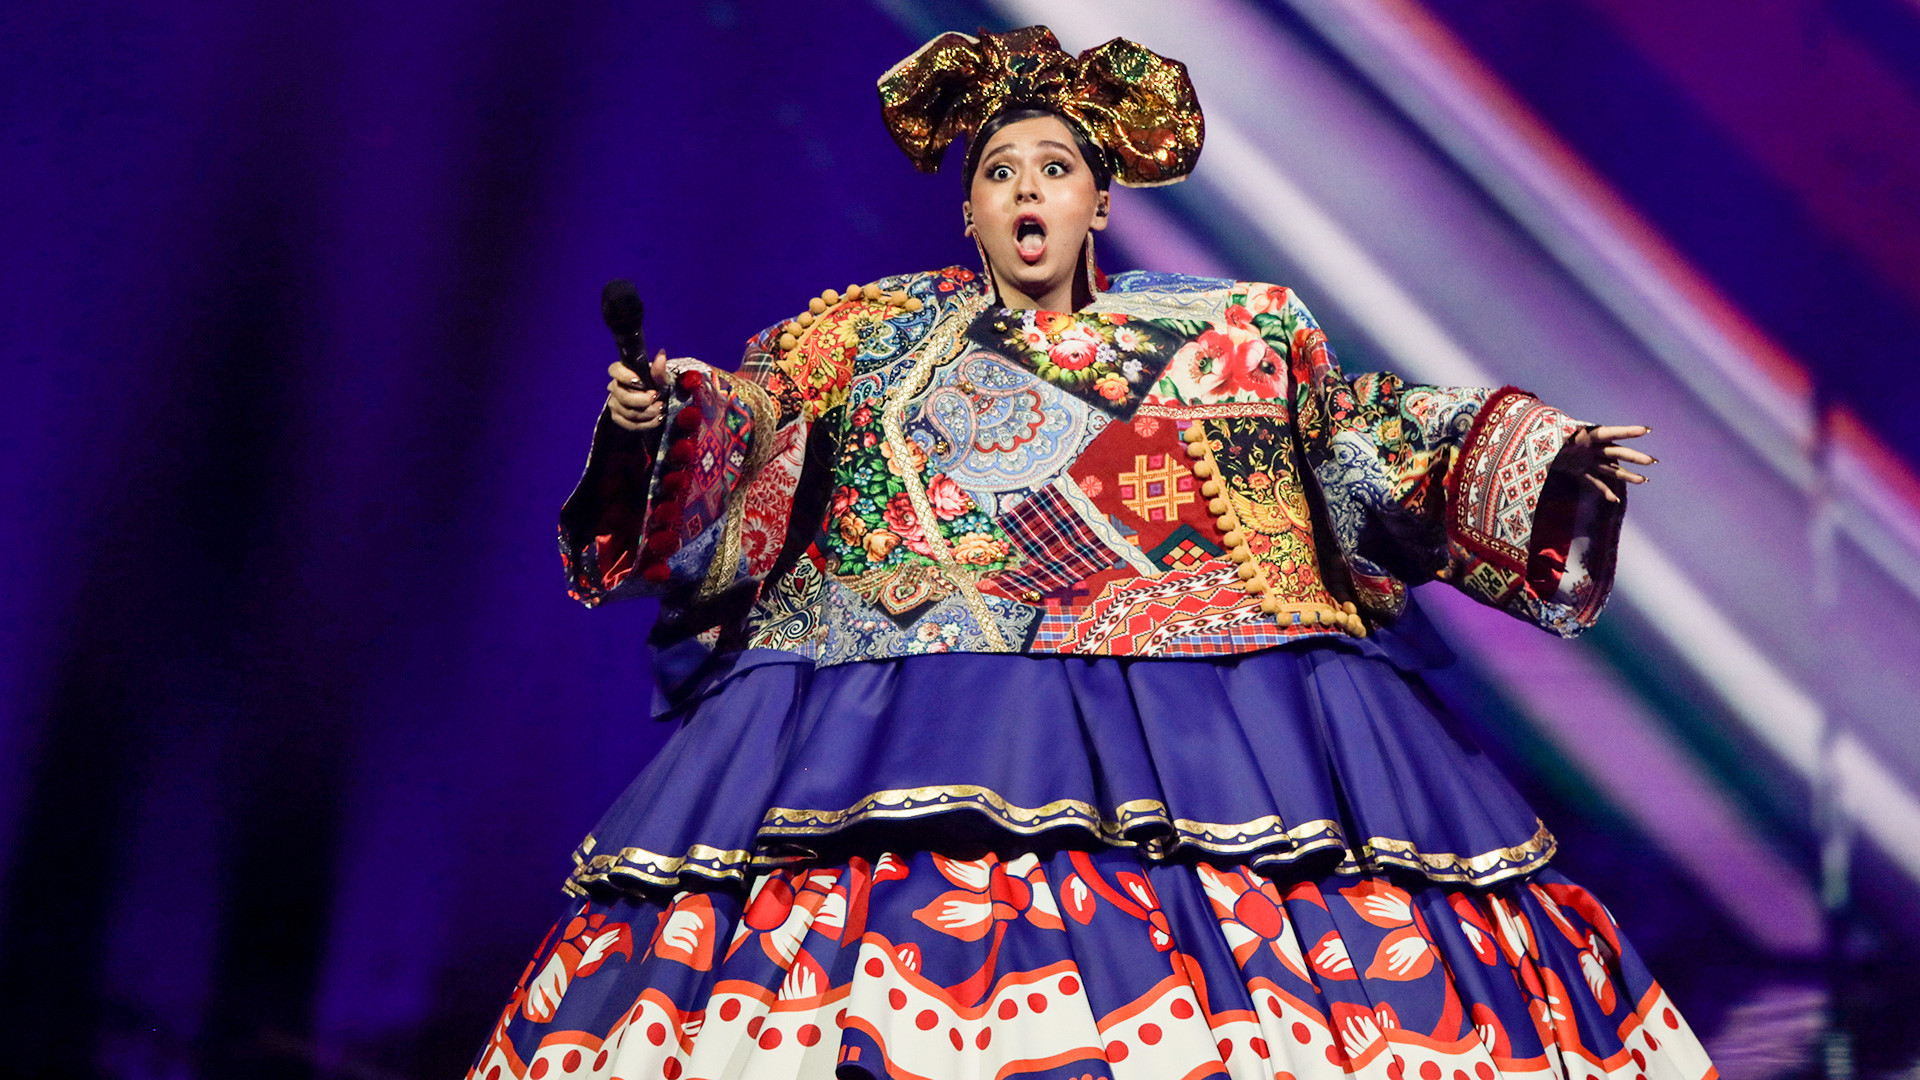 Manizha from Russia performs at the first semi-final of the Eurovision Song Contest at Ahoy arena in Rotterdam, Netherlands, Tuesday, May 18, 2021